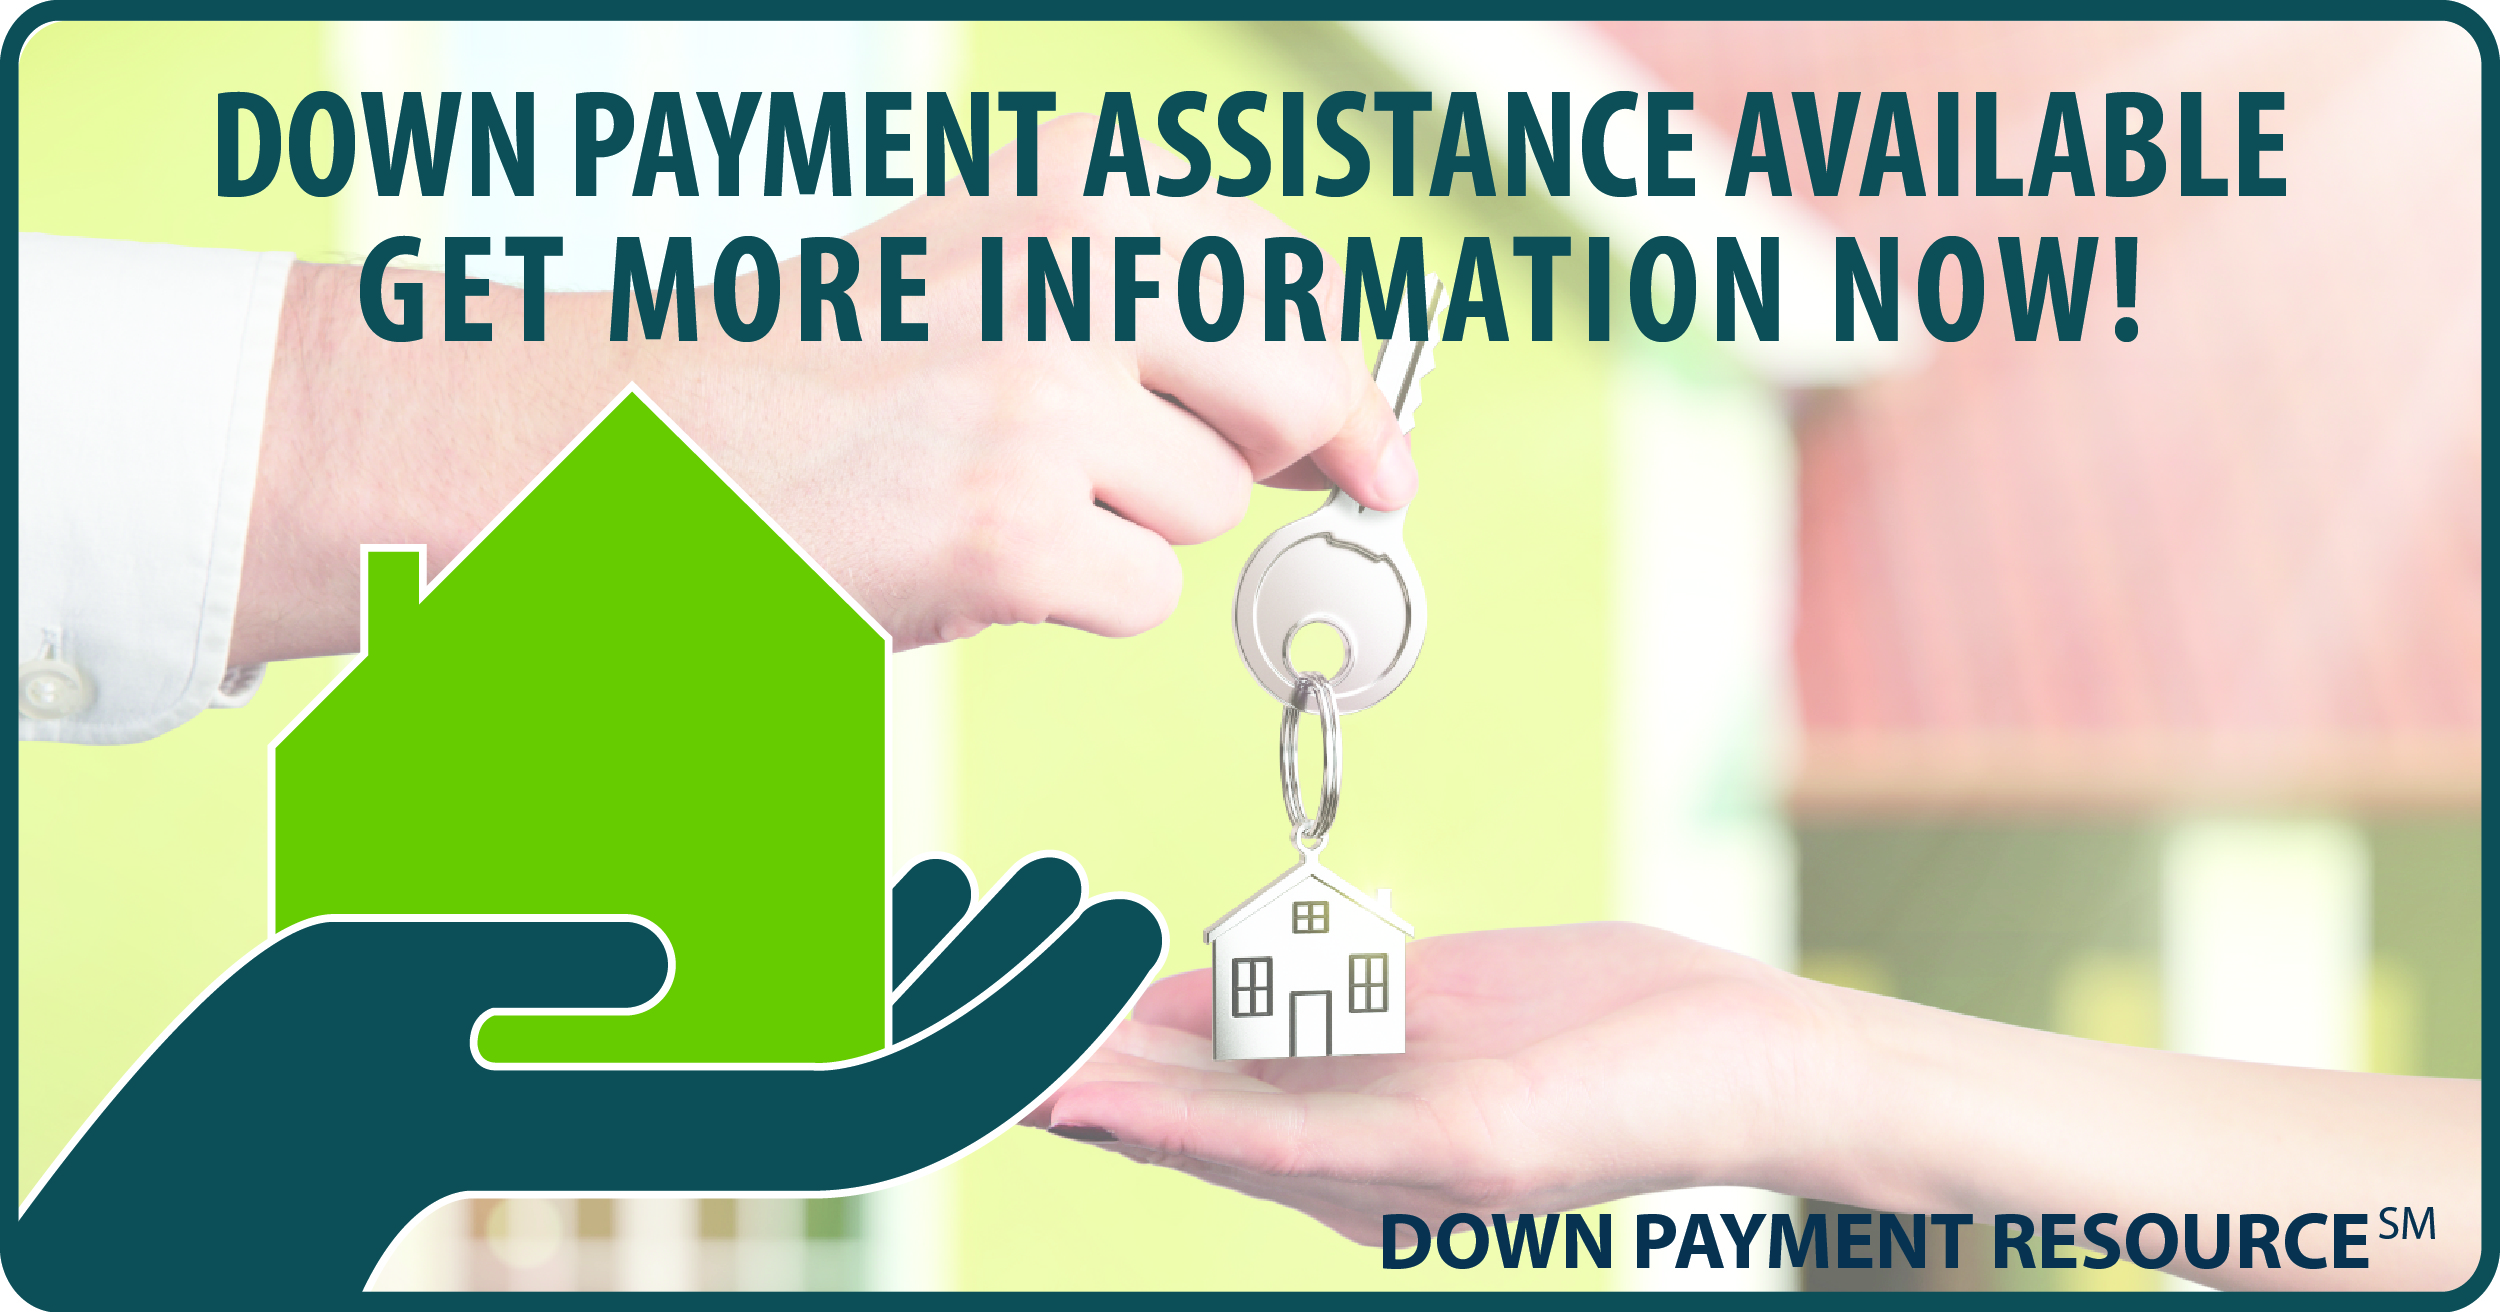 Pay down. Down payment. Payment assistance. Assist pay. Pay Assistant.